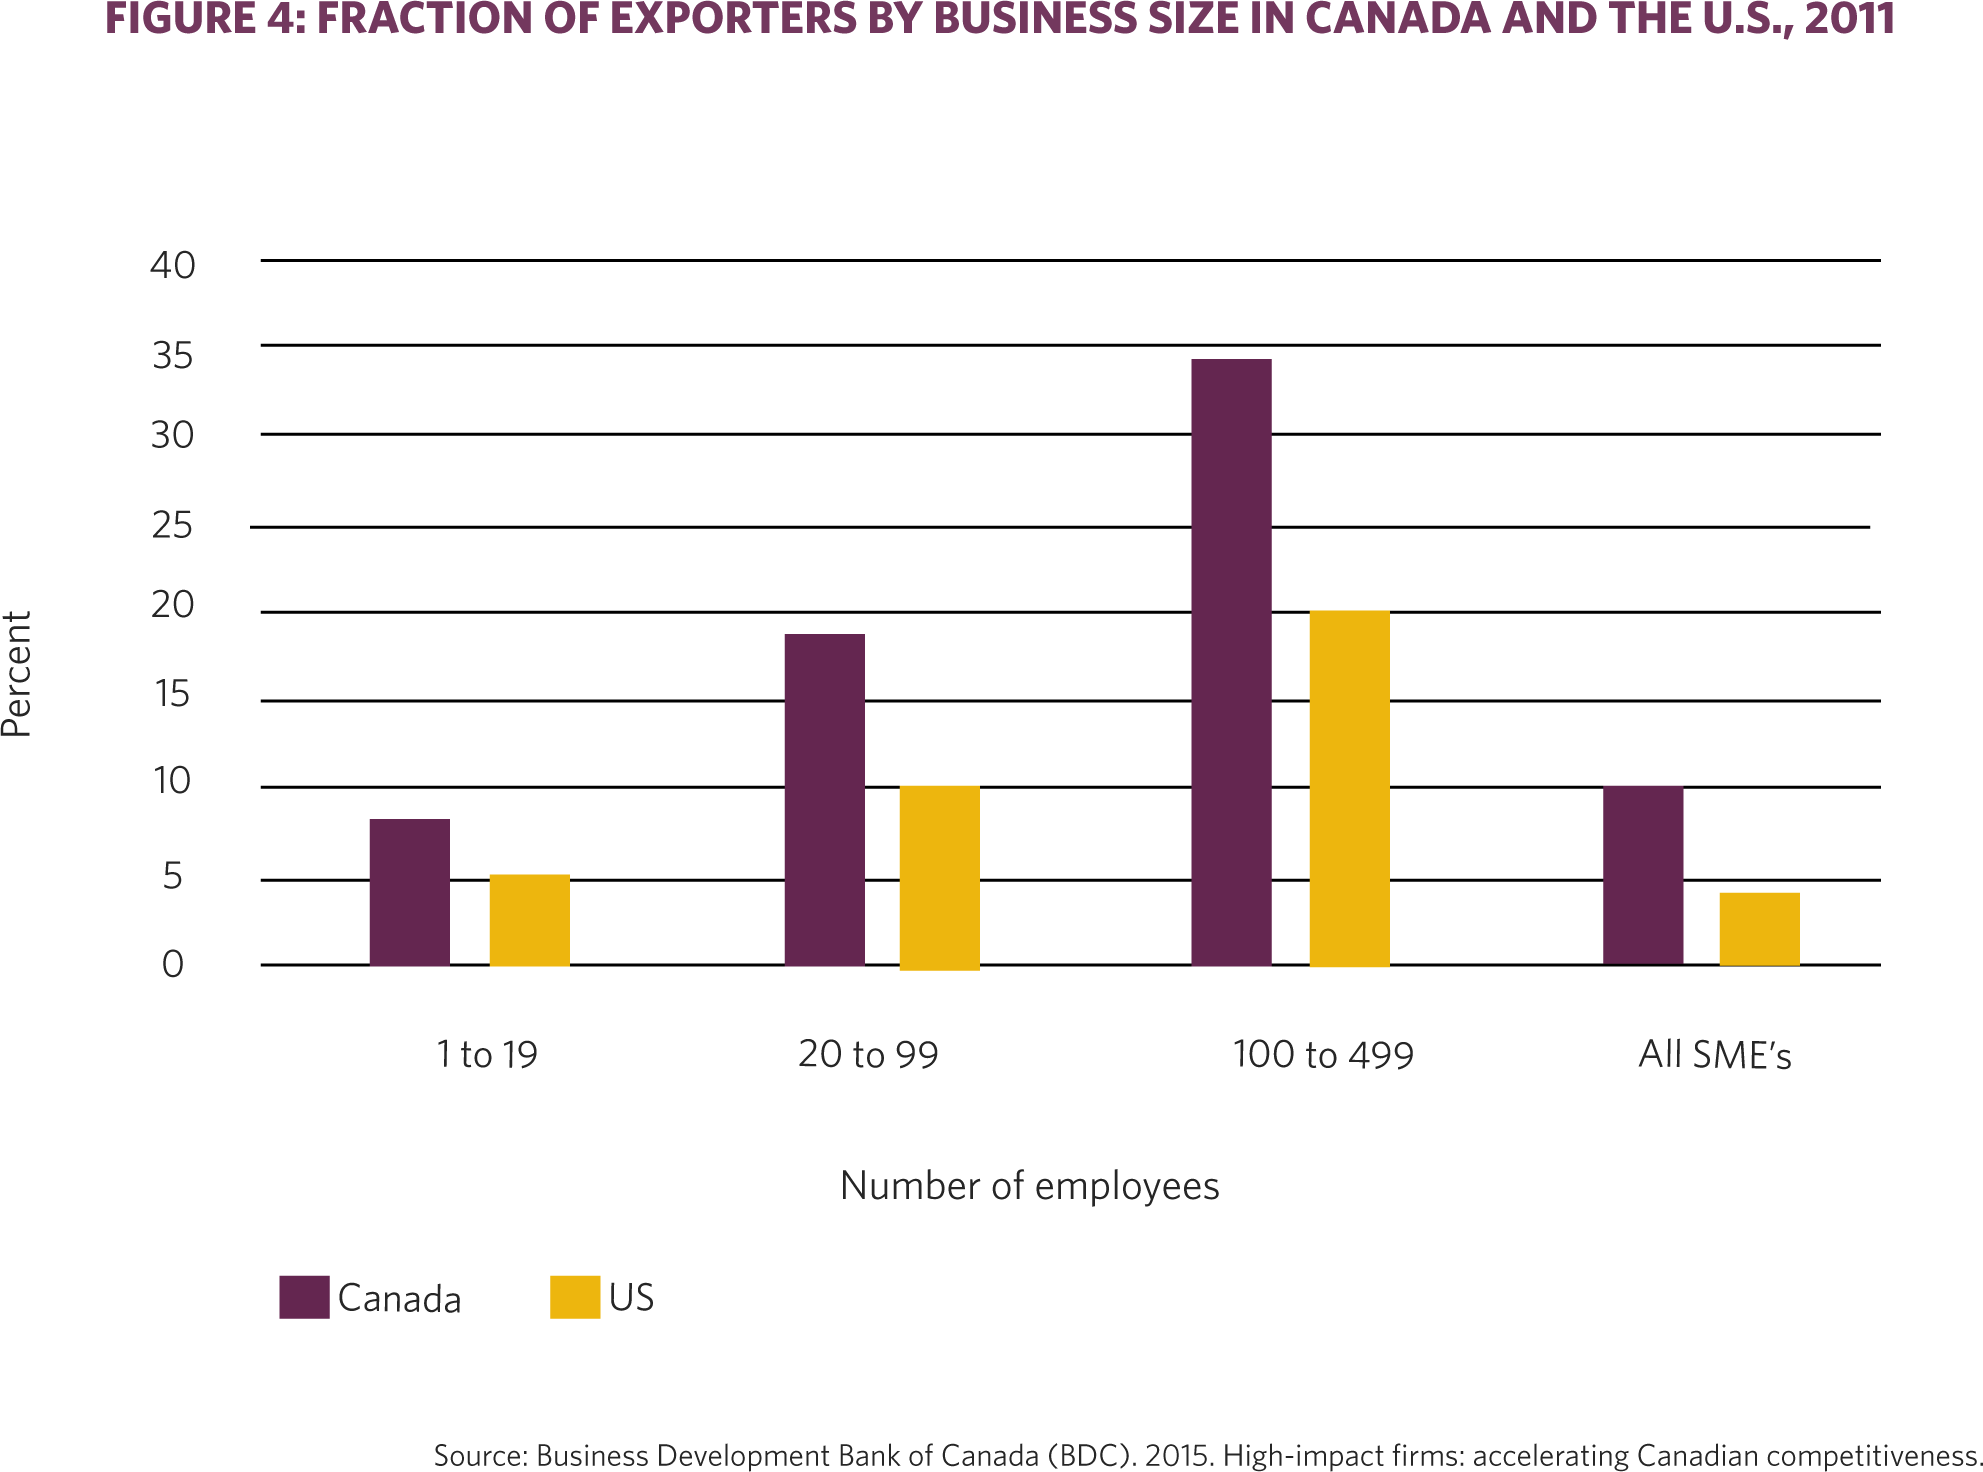 Figure 4: Fraction of exporters by business size in Canada and the U.S., 2011